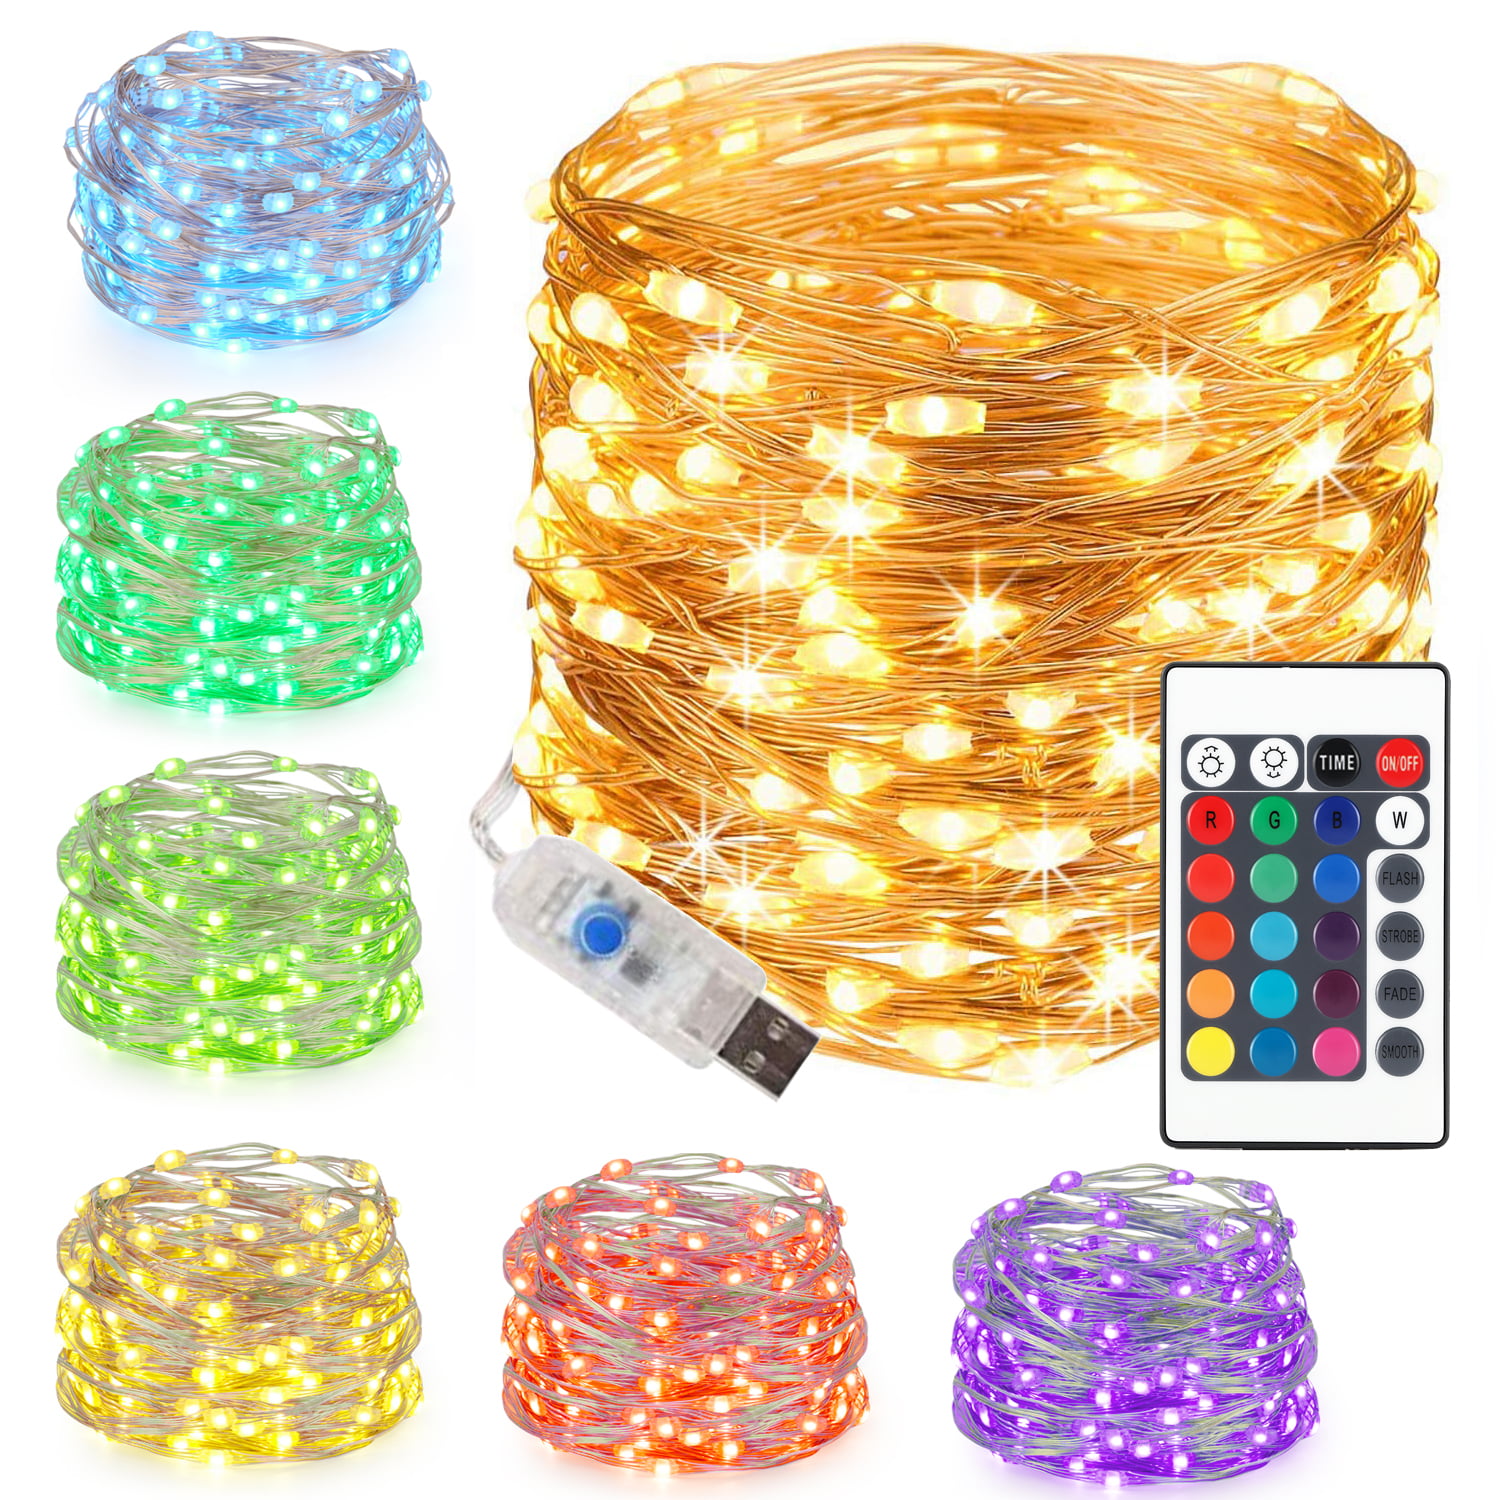 5M 50LEDs Copper Wire Timer Function LED Lighting String Fairy Light with ON/OFF 